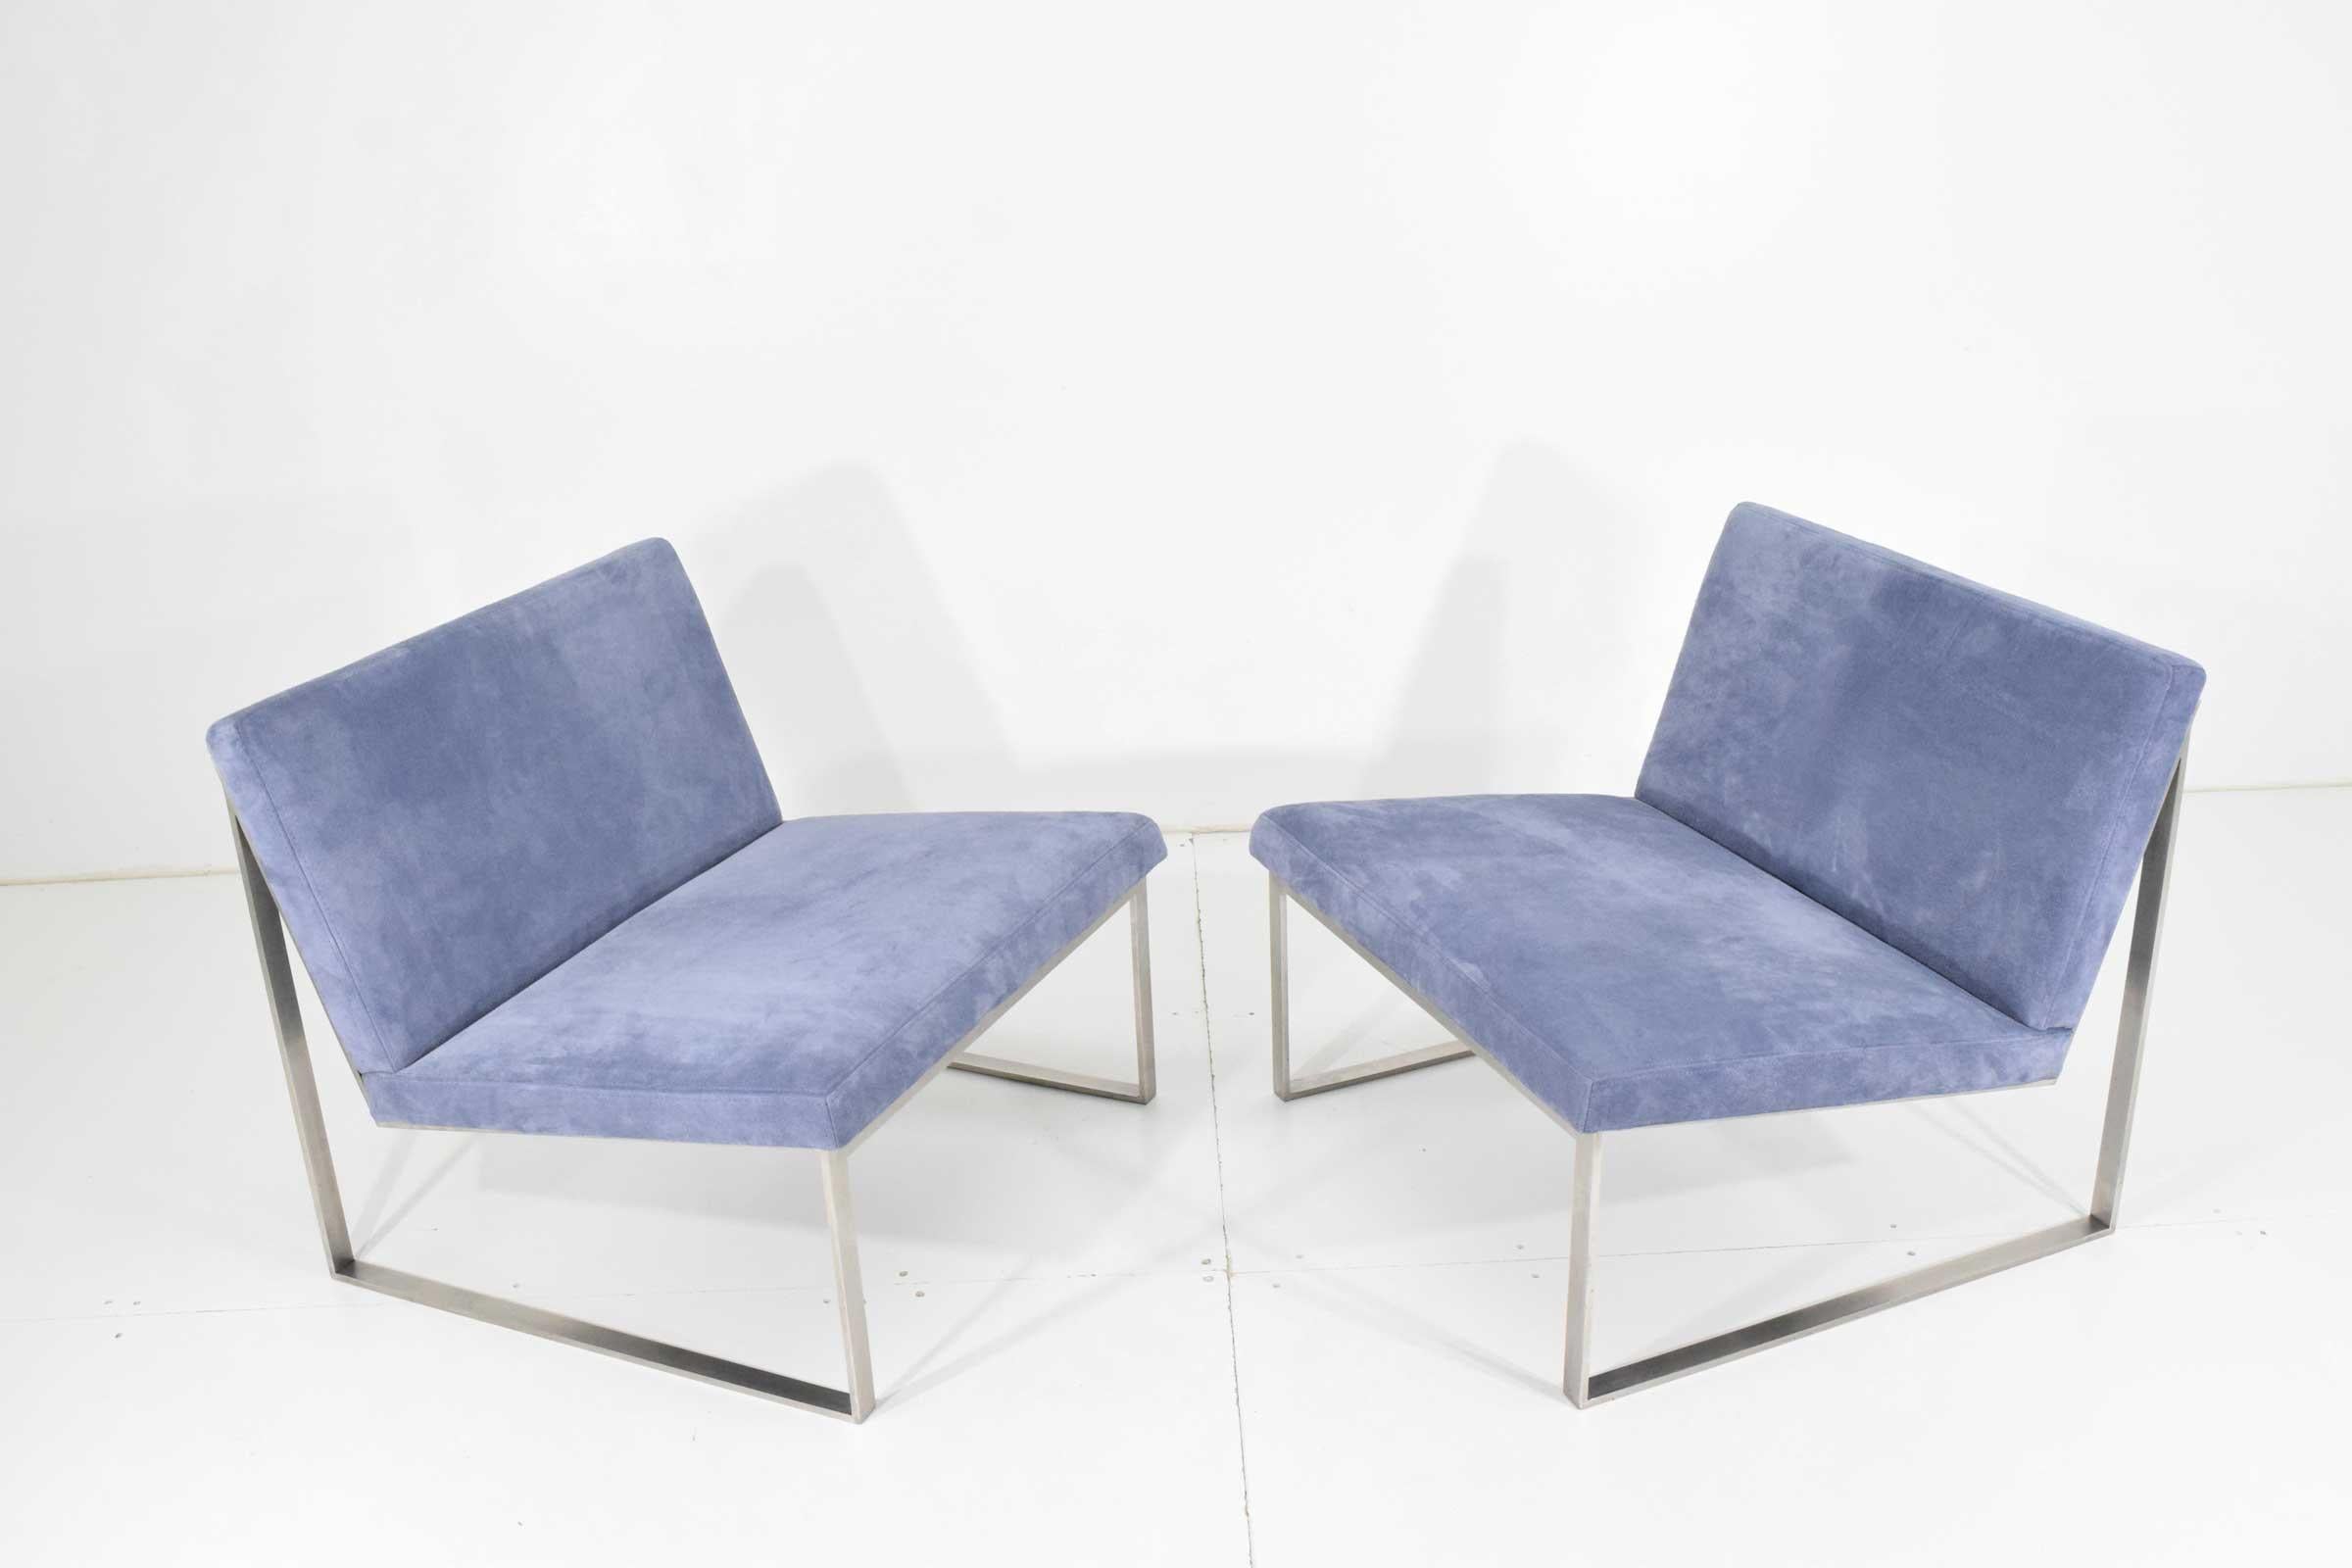 20th Century Pair of Bernhardt Lounge Chairs by Fabien Baron in Holly Hunt Suede